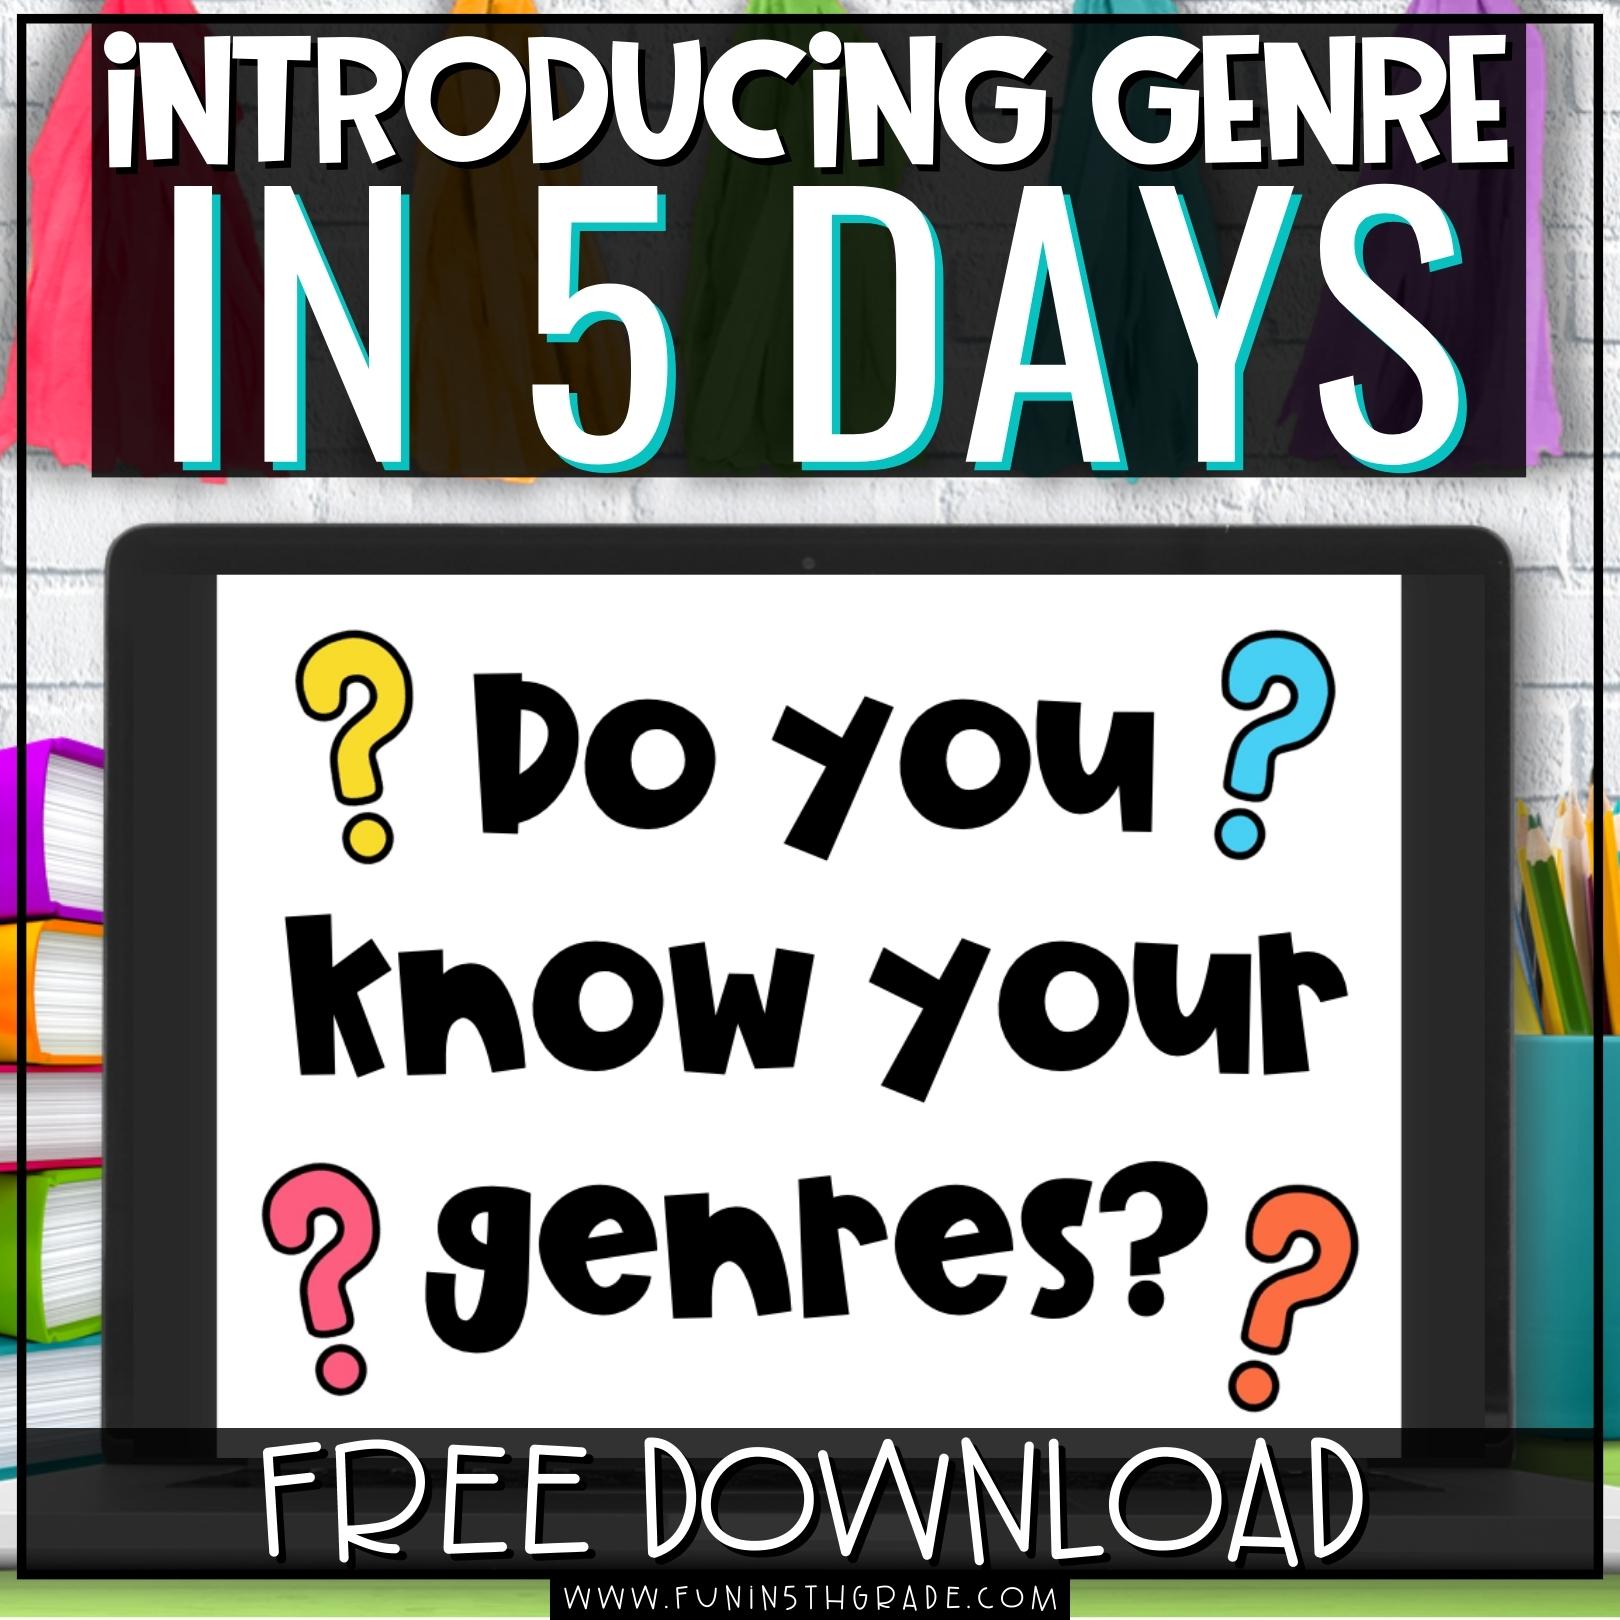 Introducing Genre in 5 Days